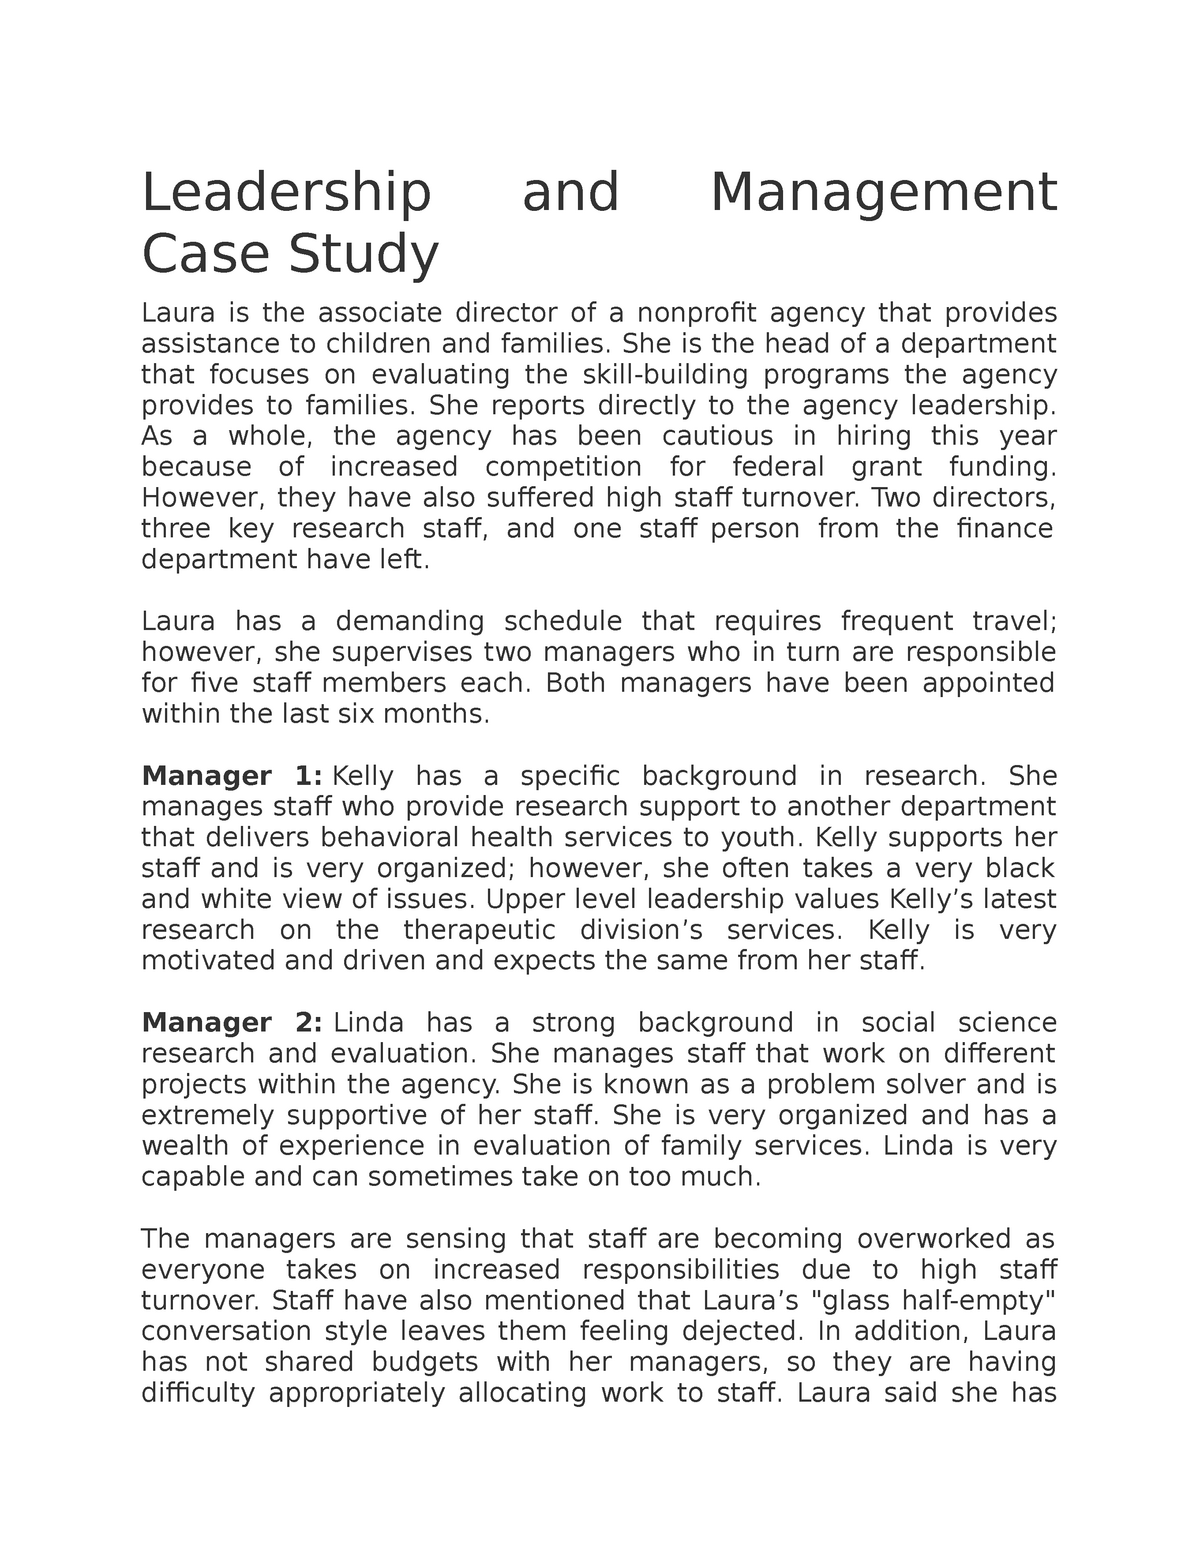 short case study on leadership with solution pdf free download